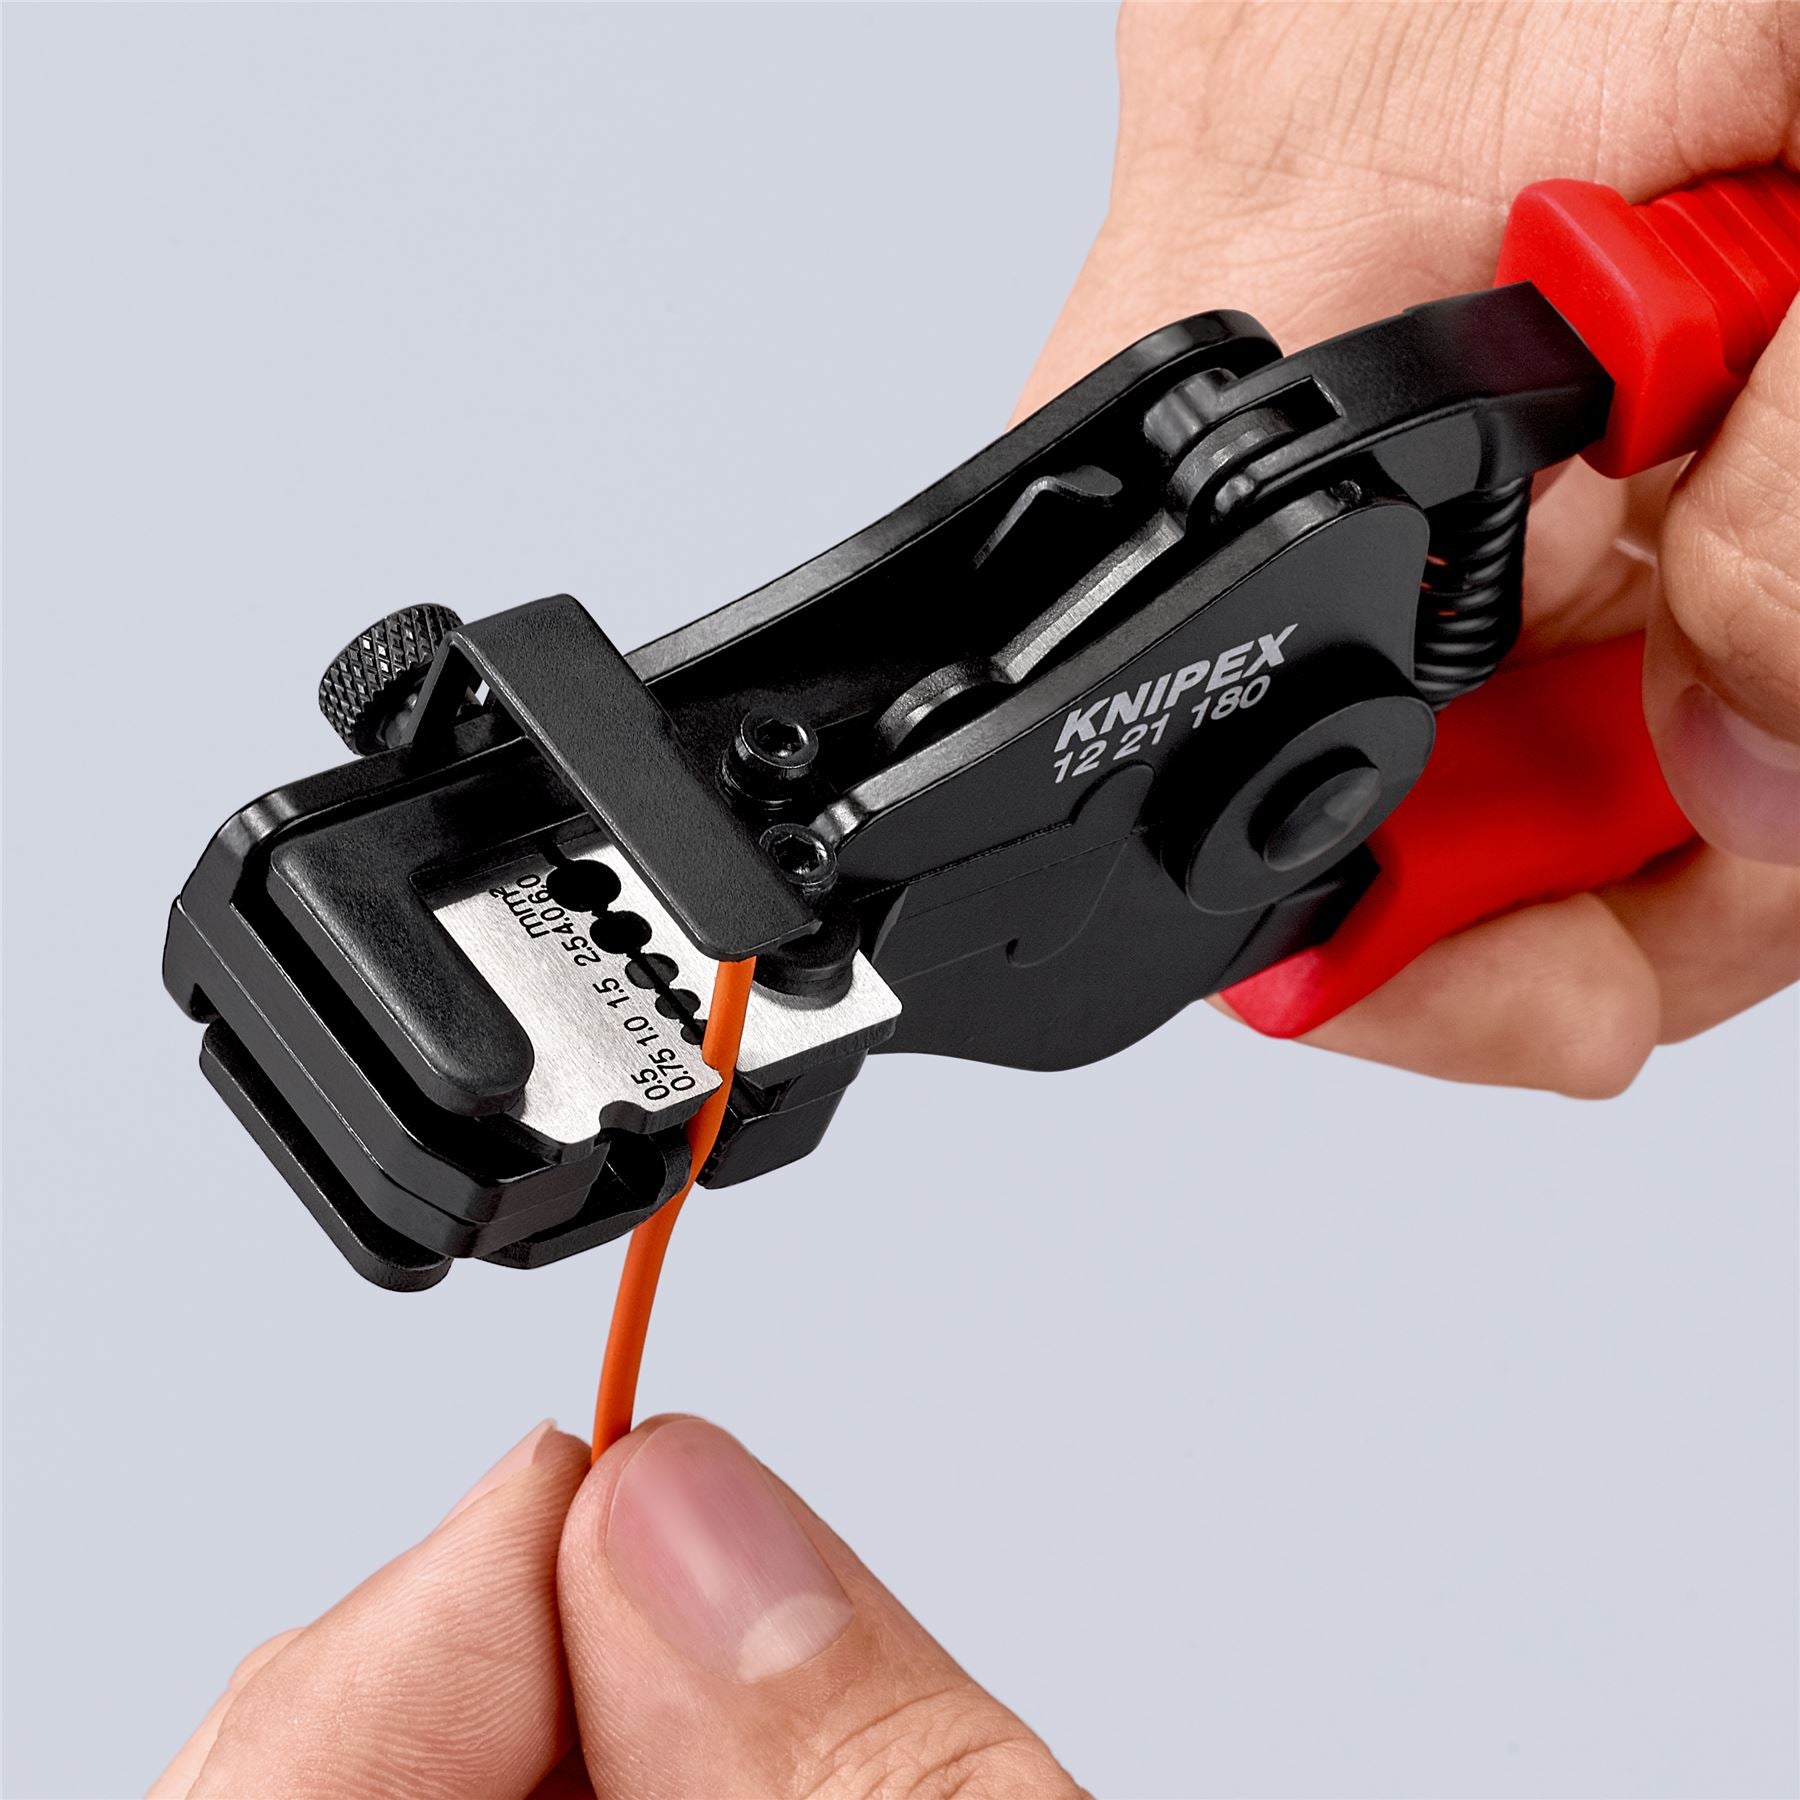 KNIPEX Insulation Stripper with Adapted Blades 180mm Stripping Pliers Plastic Coated 12 21 180